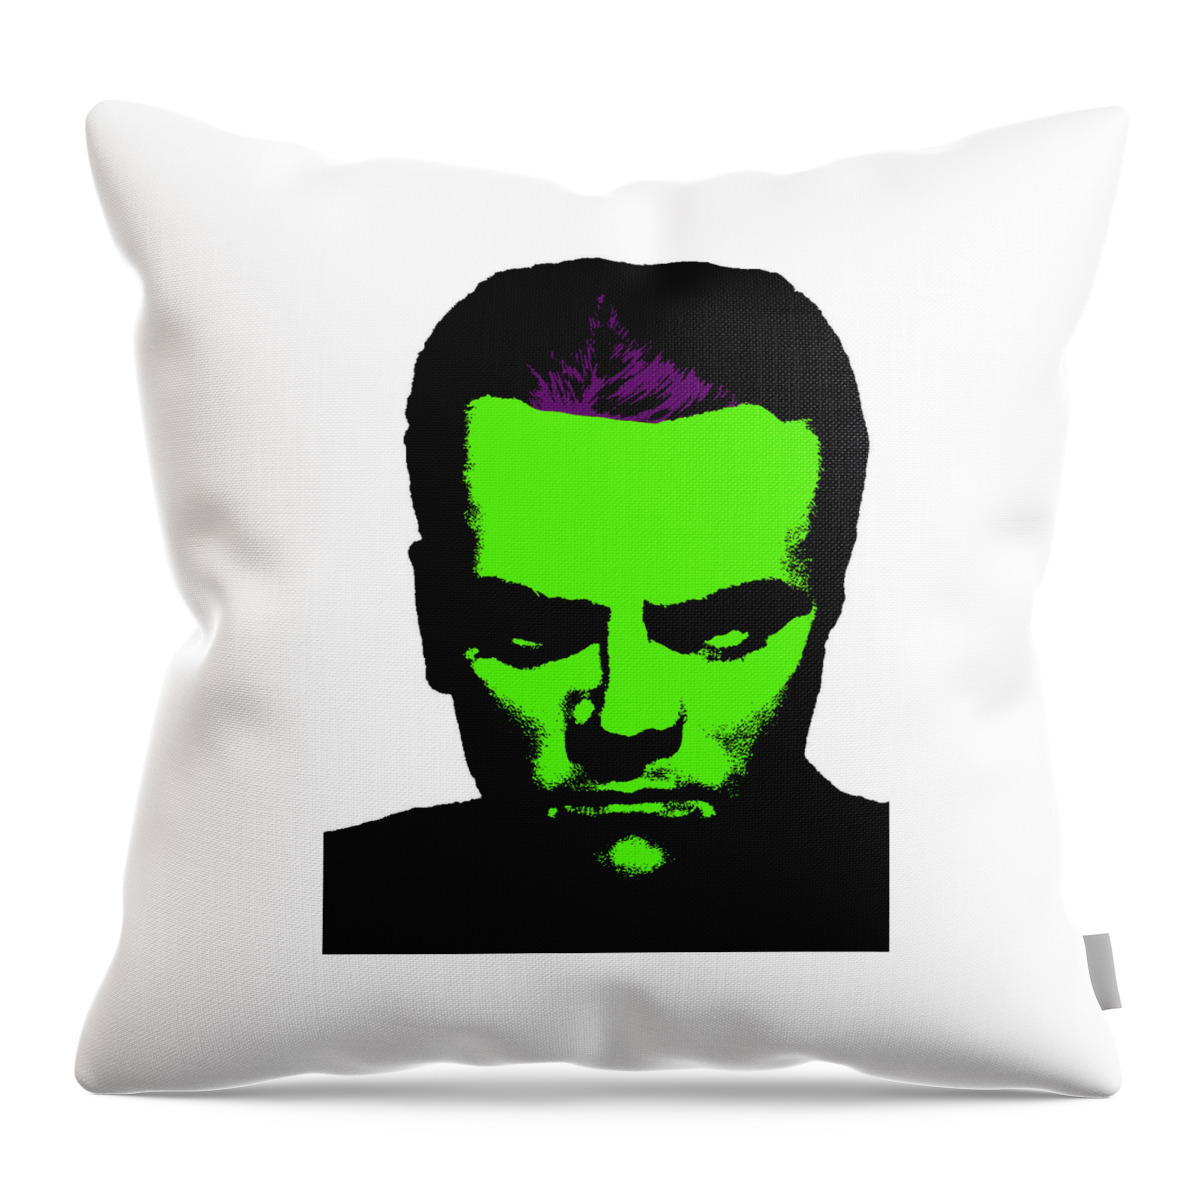 James Cagney Throw Pillow featuring the photograph Cagney 2 by Emme Pons